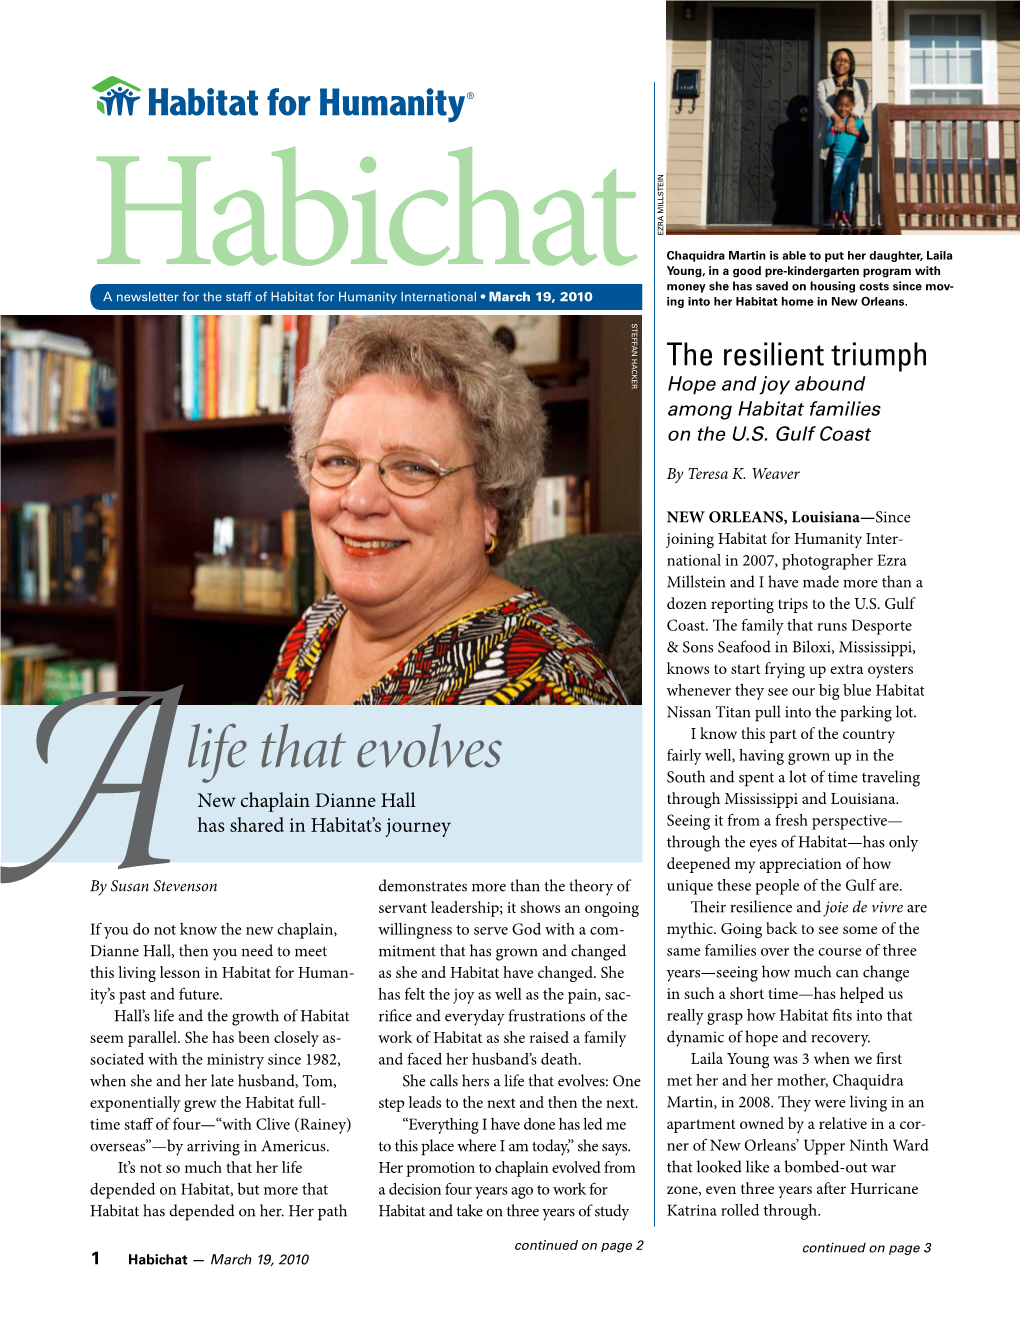 Life That Evolves South and Spent a Lot of Time Traveling New Chaplain Dianne Hall Through Mississippi and Louisiana